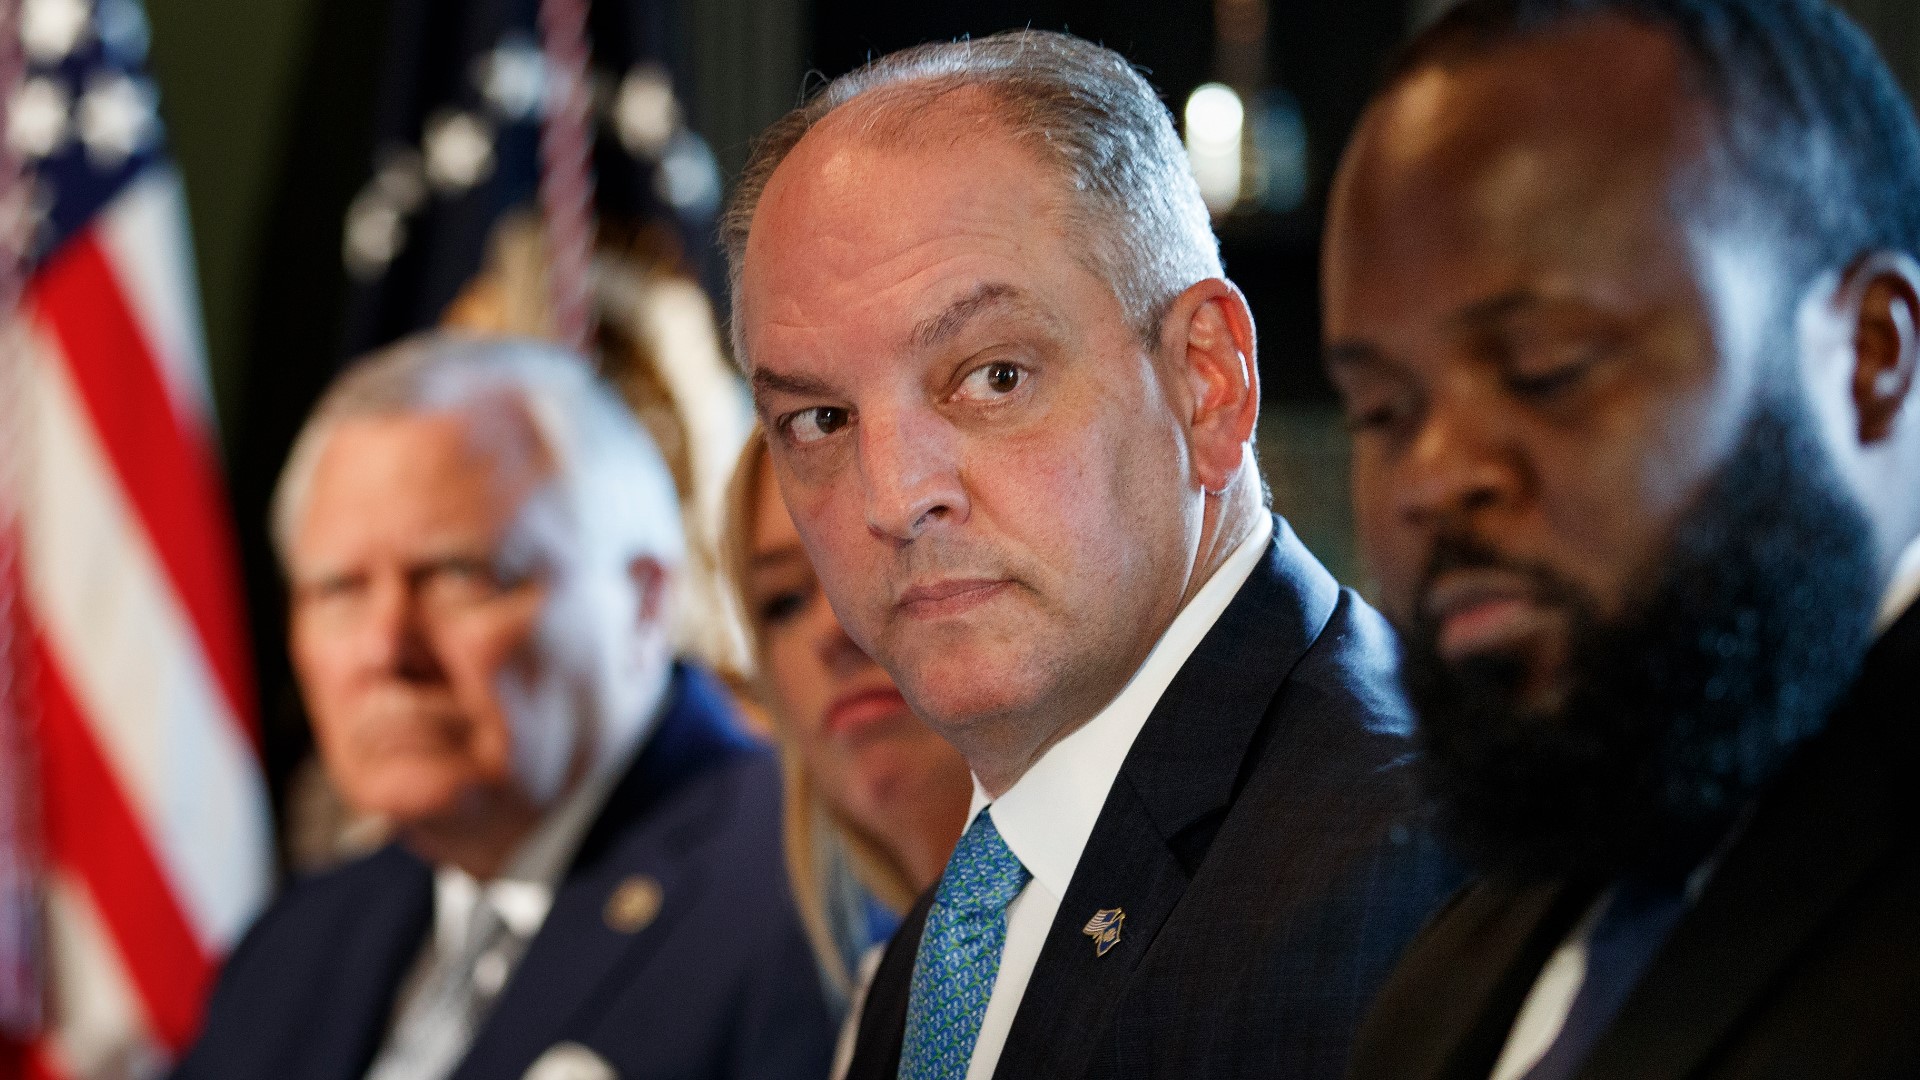 Louisiana Republicans suggests John Bel Edwards has created the summit to bolster his bid for a second term in office.